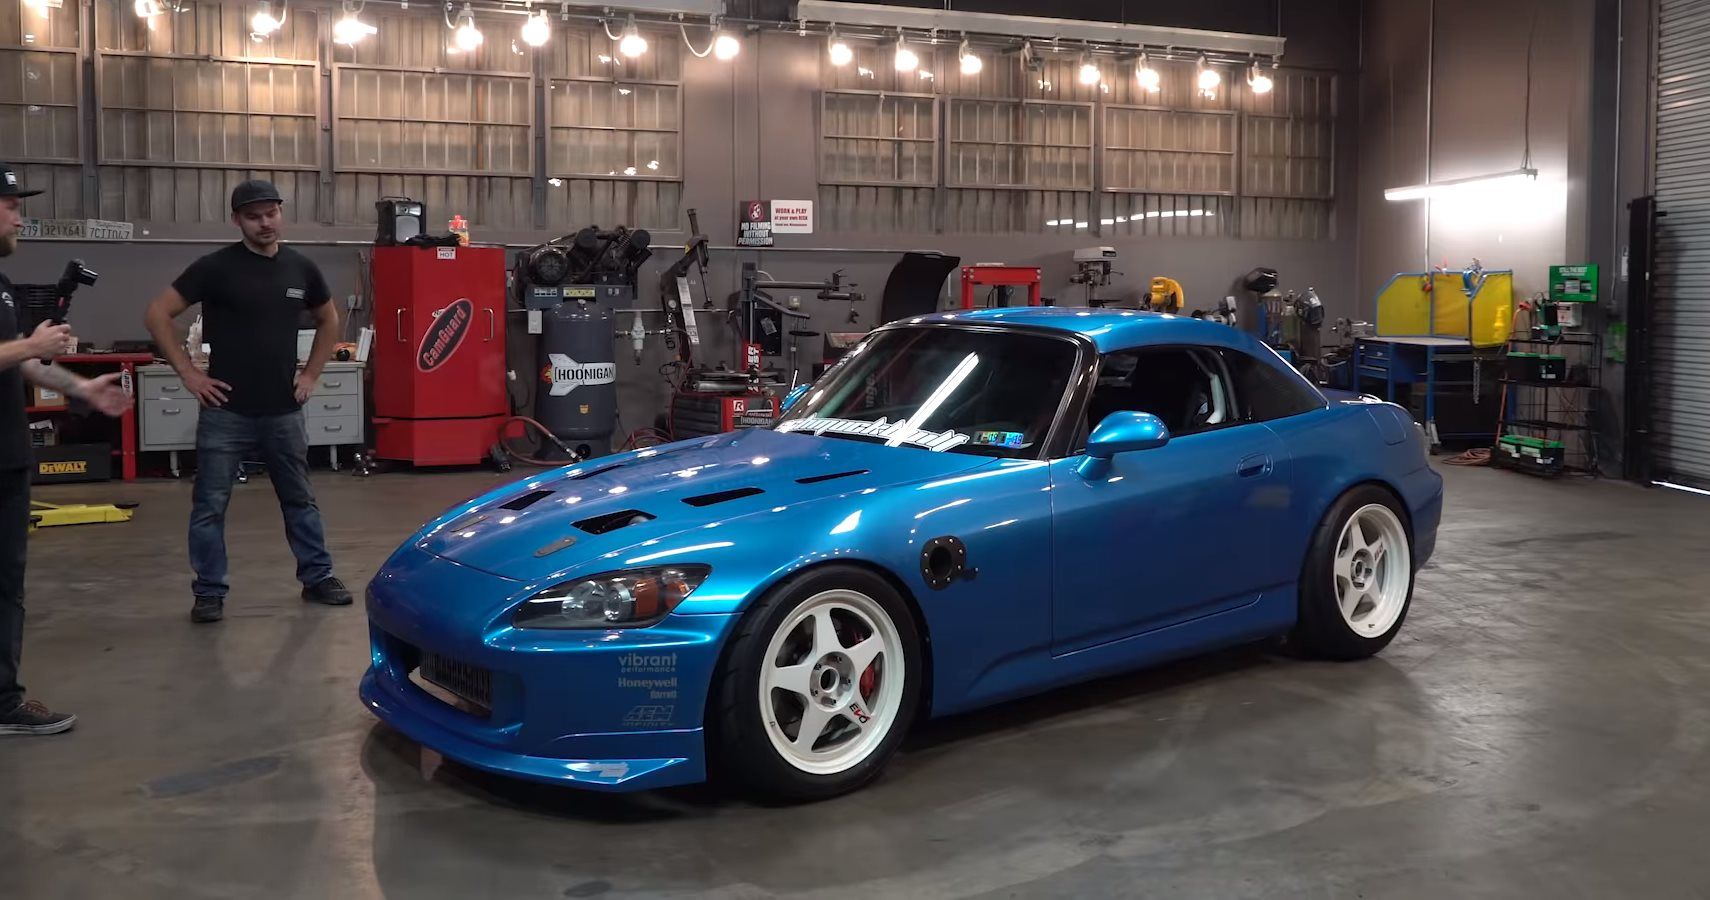 Gearhead Replaces Honda S2000 Engine With Twin Turbo Acura V6